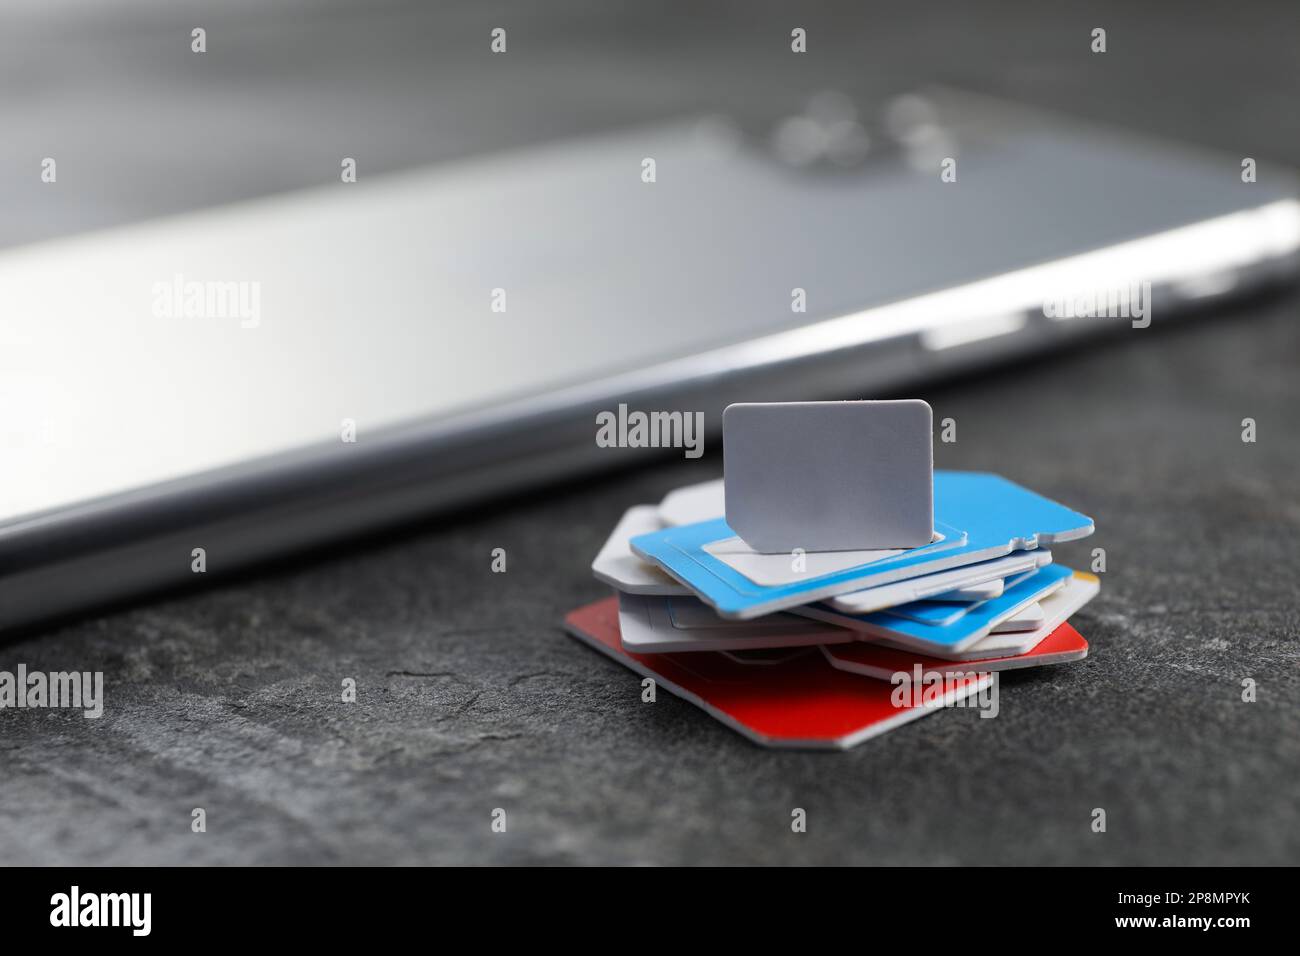 SIM cards and mobile phone on grey table, closeup Stock Photo